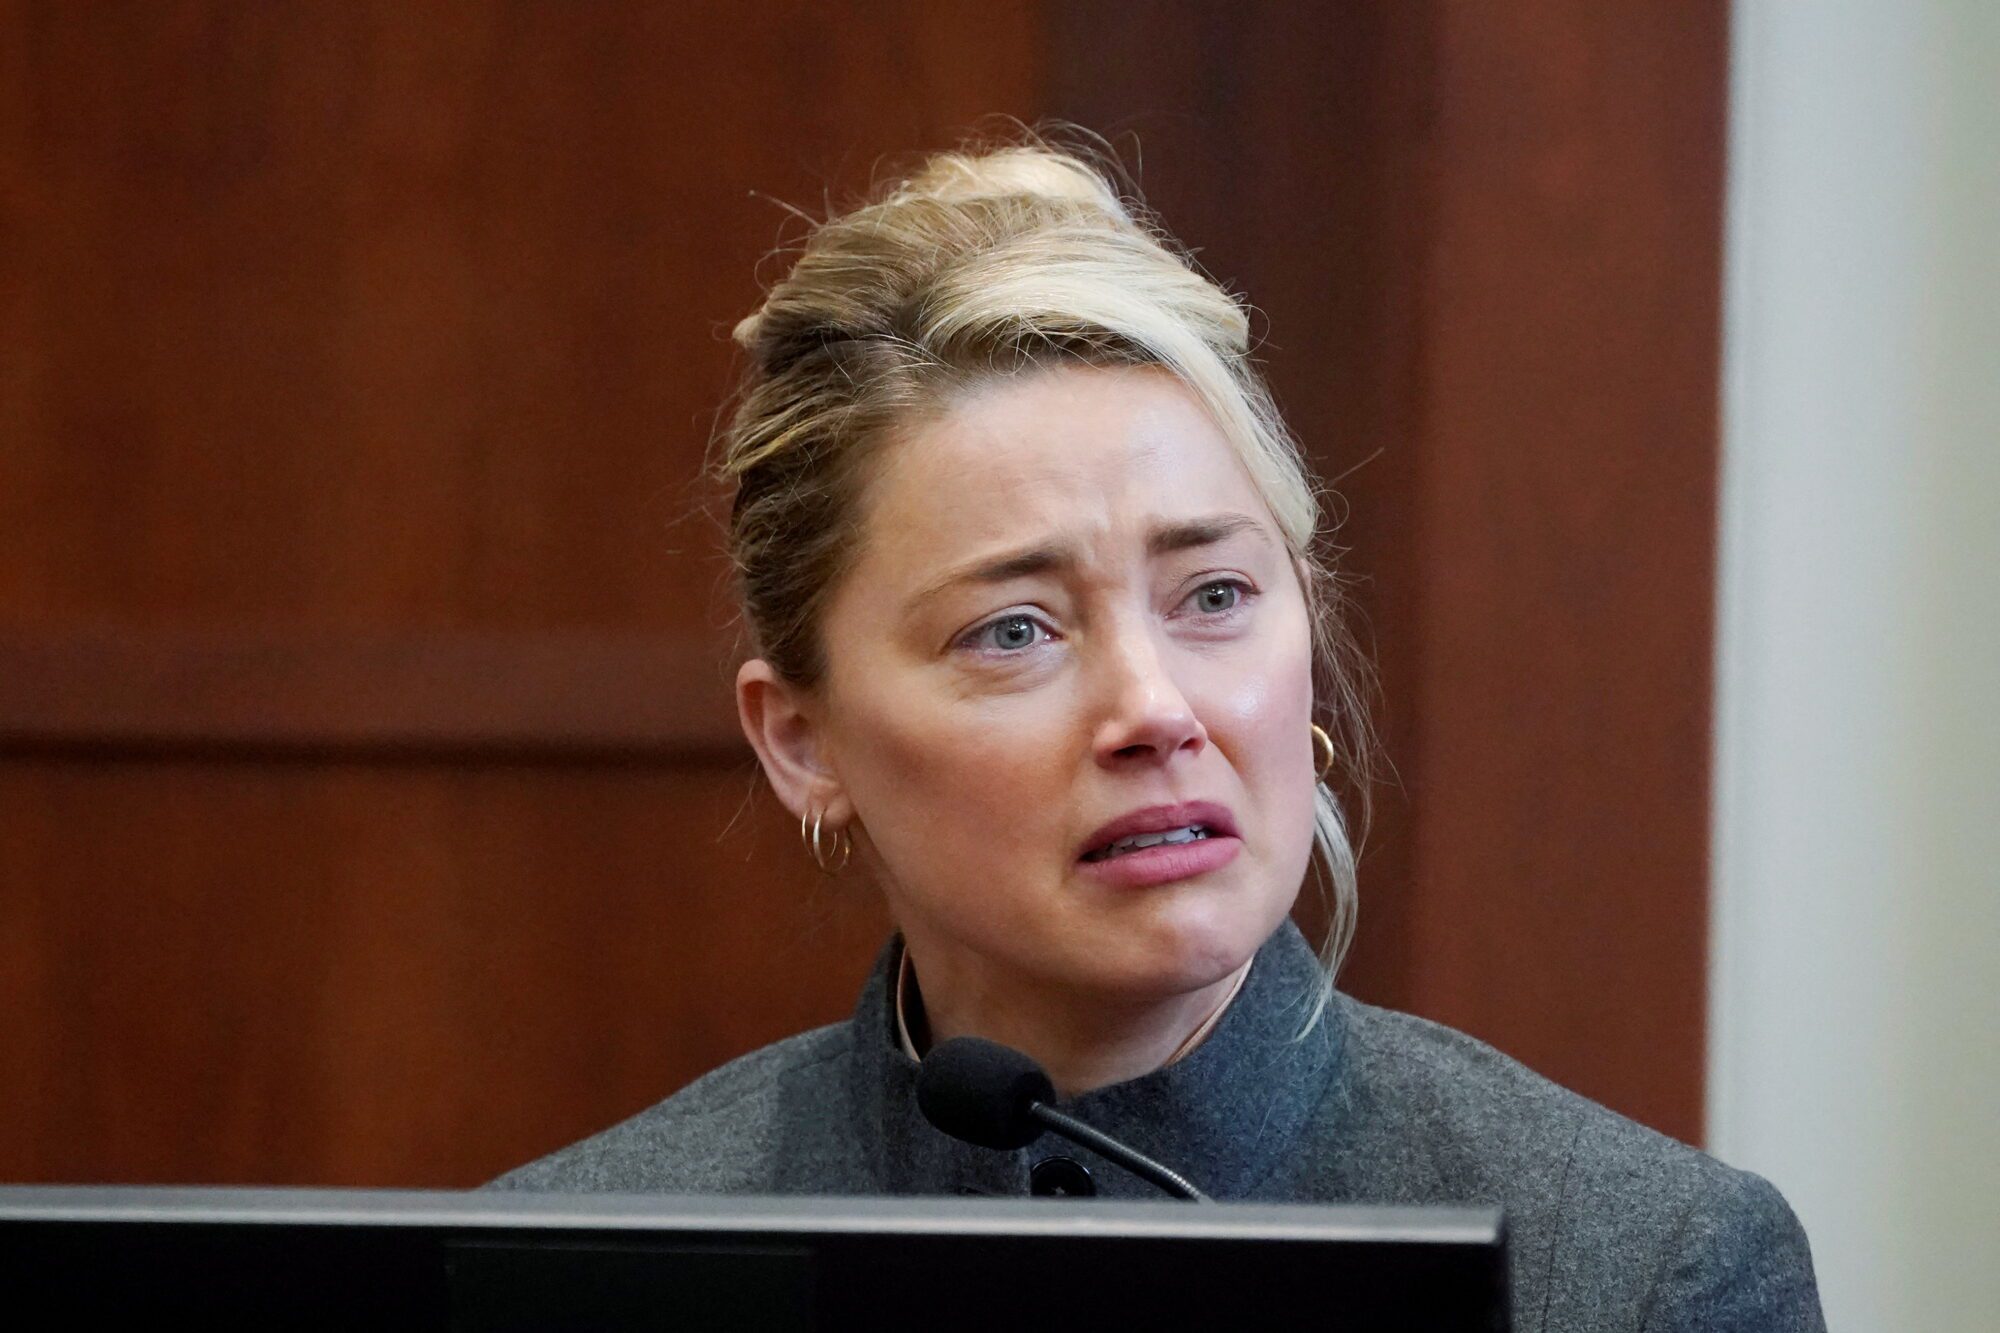 Actor Amber Heard testifies in the courtroom at the Fairfax County Circuit Courthouse in Fairfax, Va., Monday, May 16, 2022.  Steve Helber/Pool via REUTERS